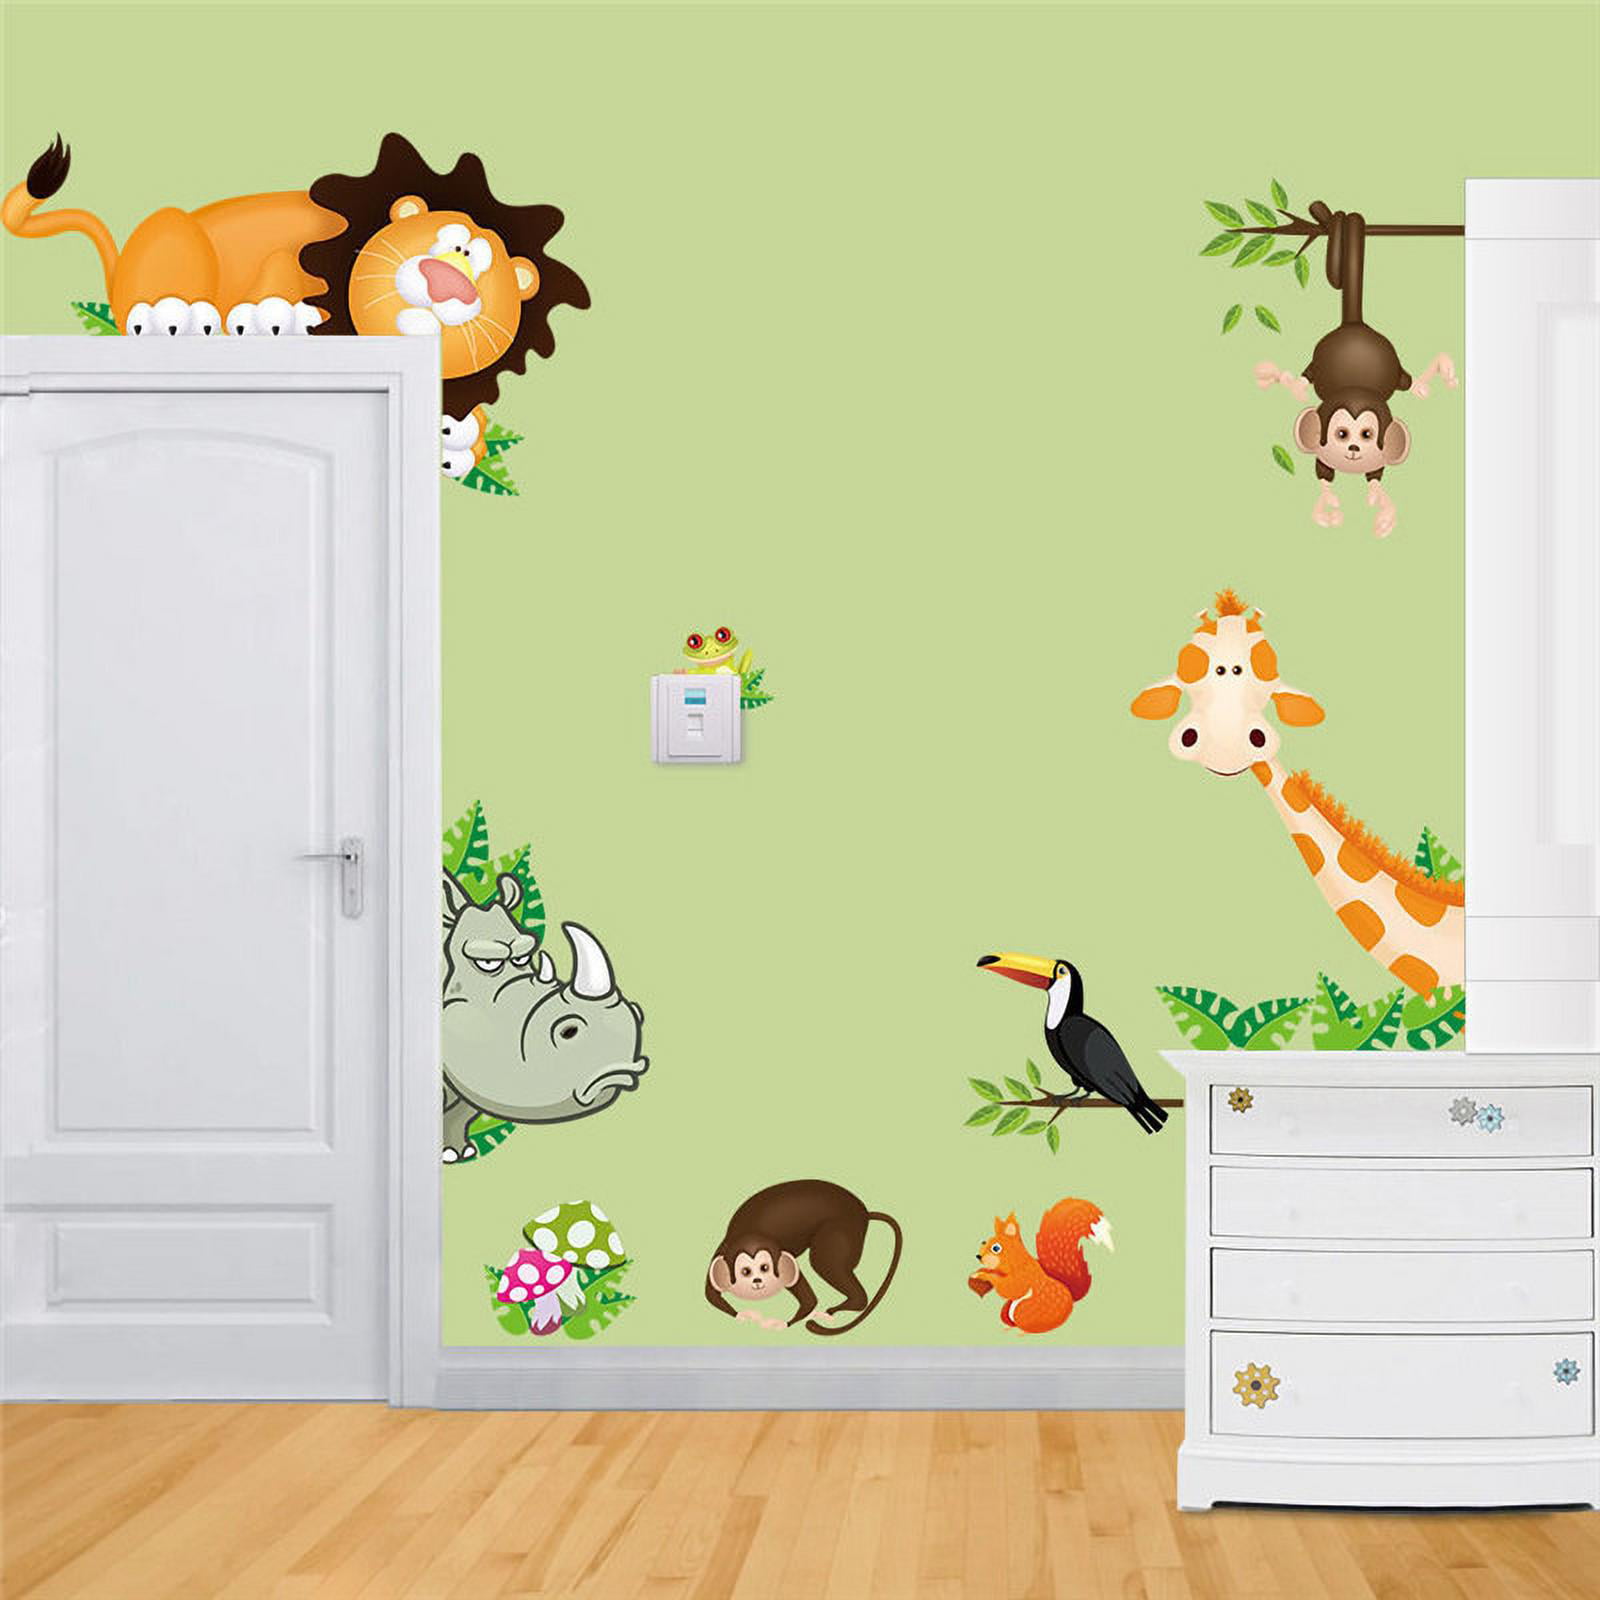 Light Switch Sticker Cute Jungle Animals Remoable Wall Decor Decal Kids Bedroom 